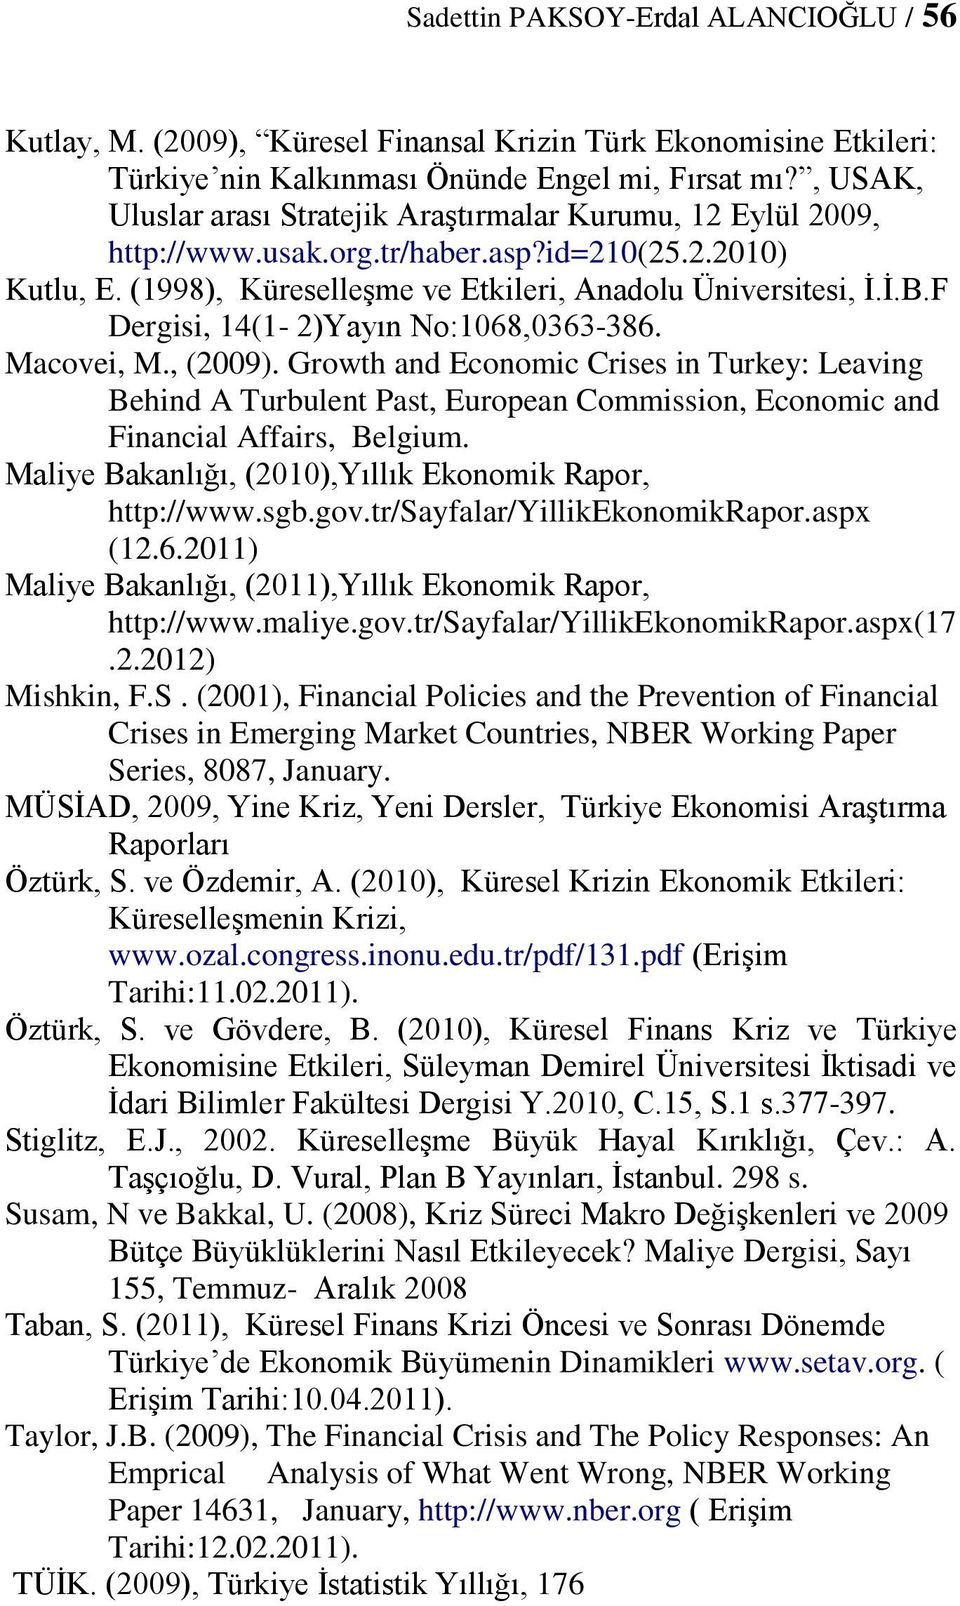 F Dergisi, 14(1-2)Yayın No:1068,0363-386. Macovei, M., (2009). Growth and Economic Crises in Turkey: Leaving Behind A Turbulent Past, European Commission, Economic and Financial Affairs, Belgium.